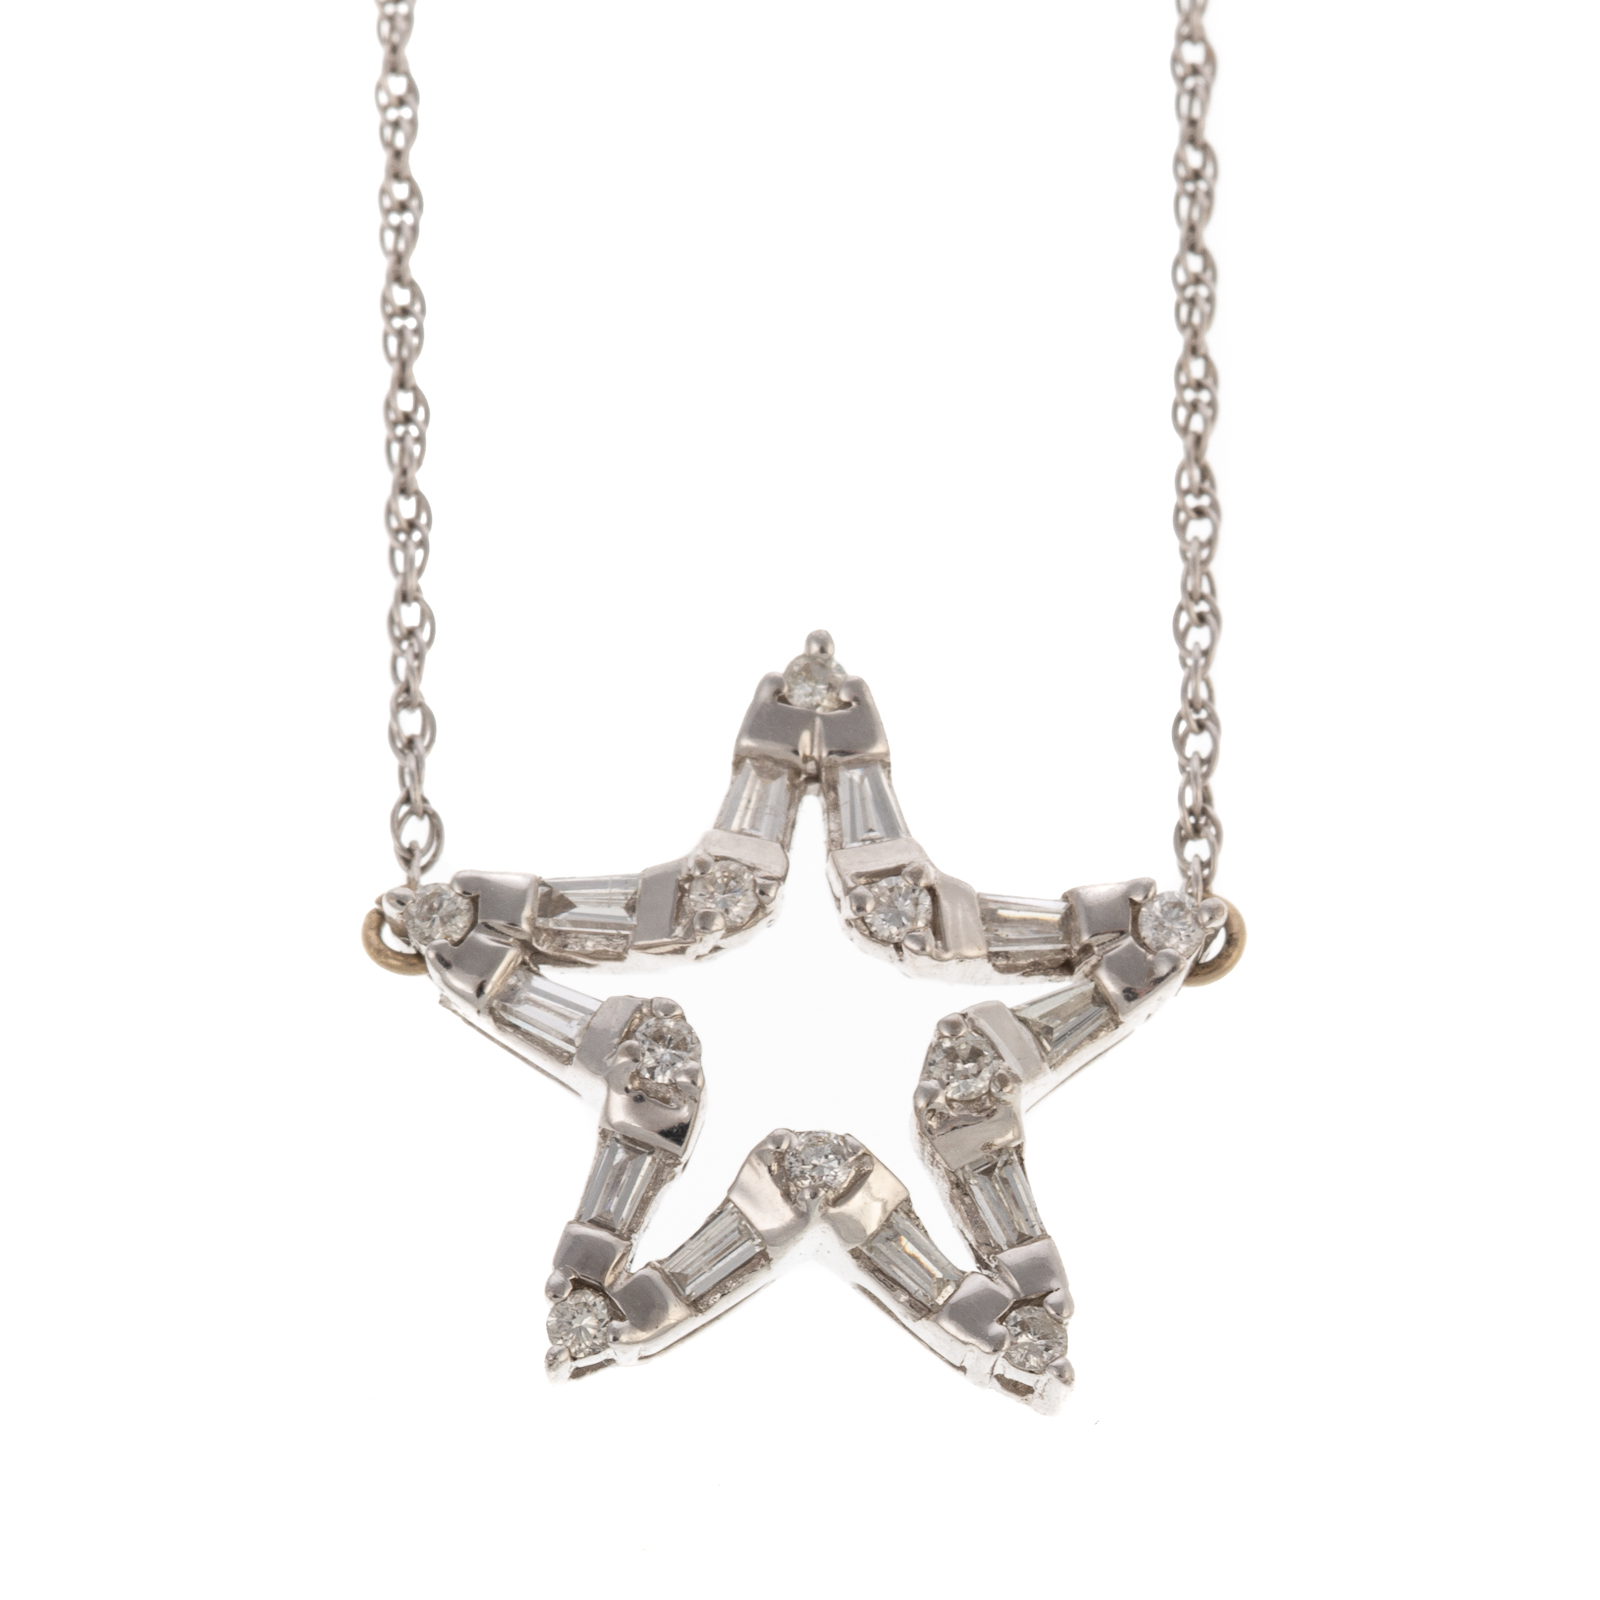 AN OPEN DIAMOND STAR NECKLACE IN 2878c0